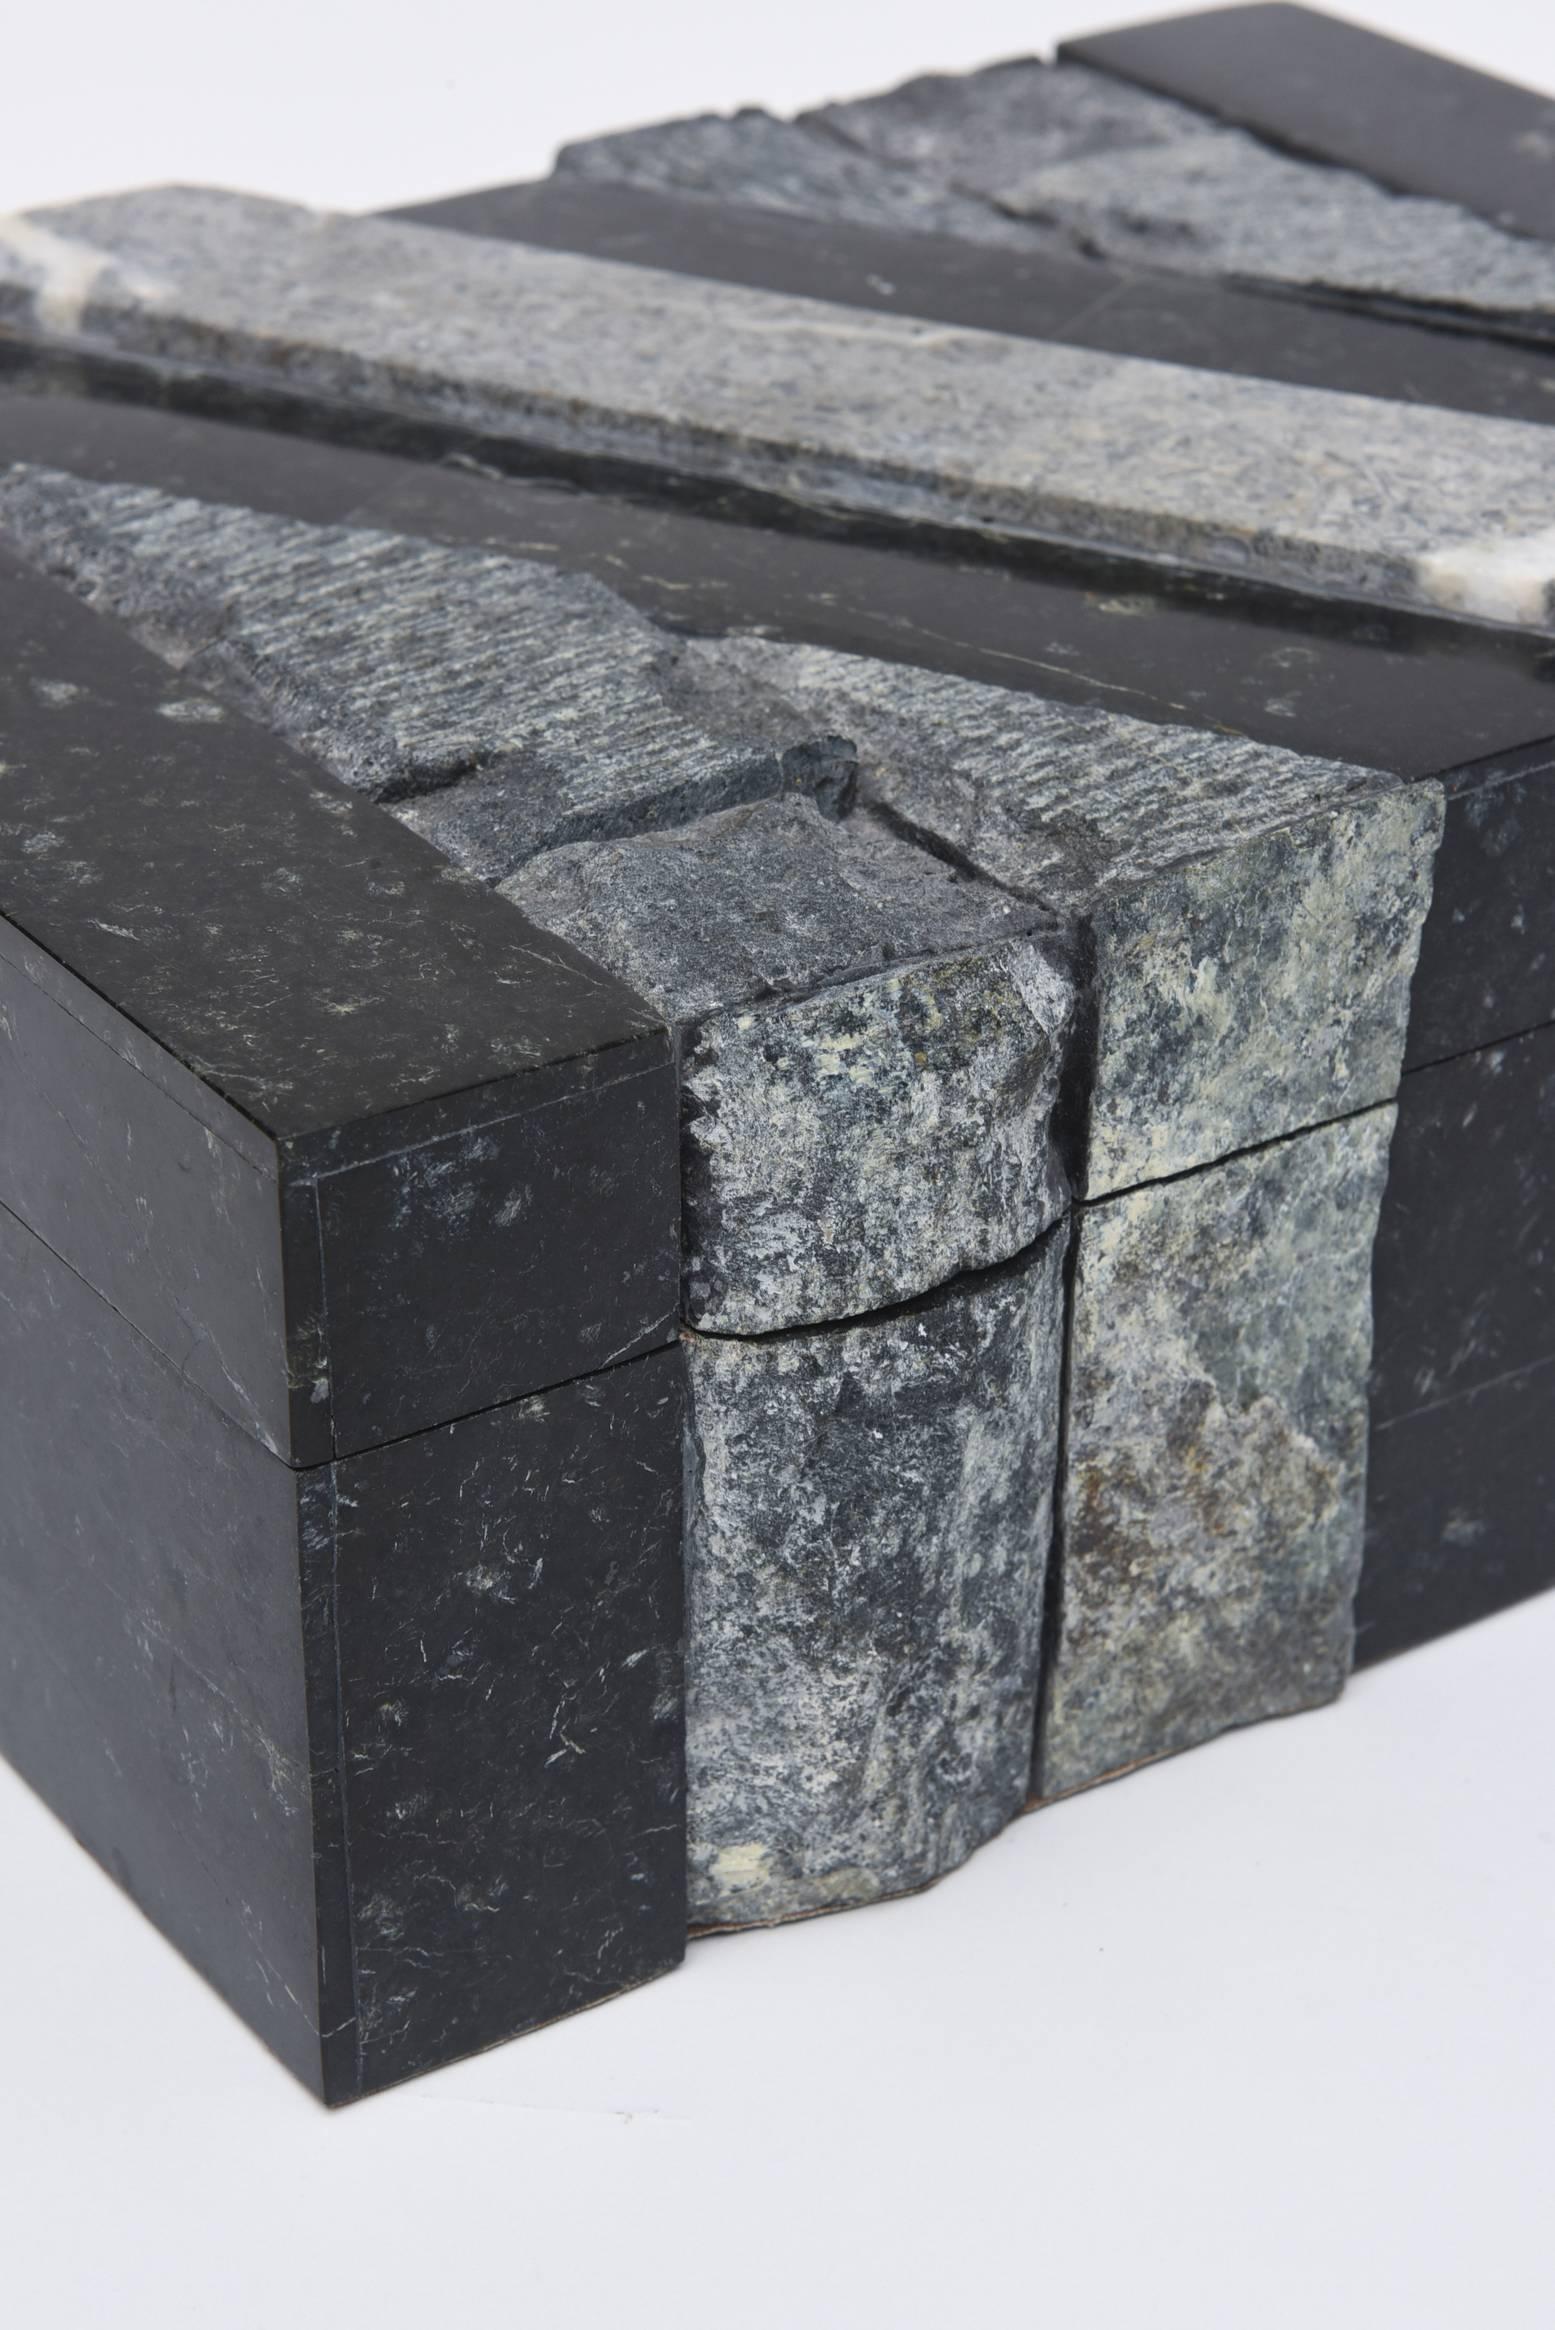 Textural Polished and Unpolished Stone and Wood Large Sculptural Box 2